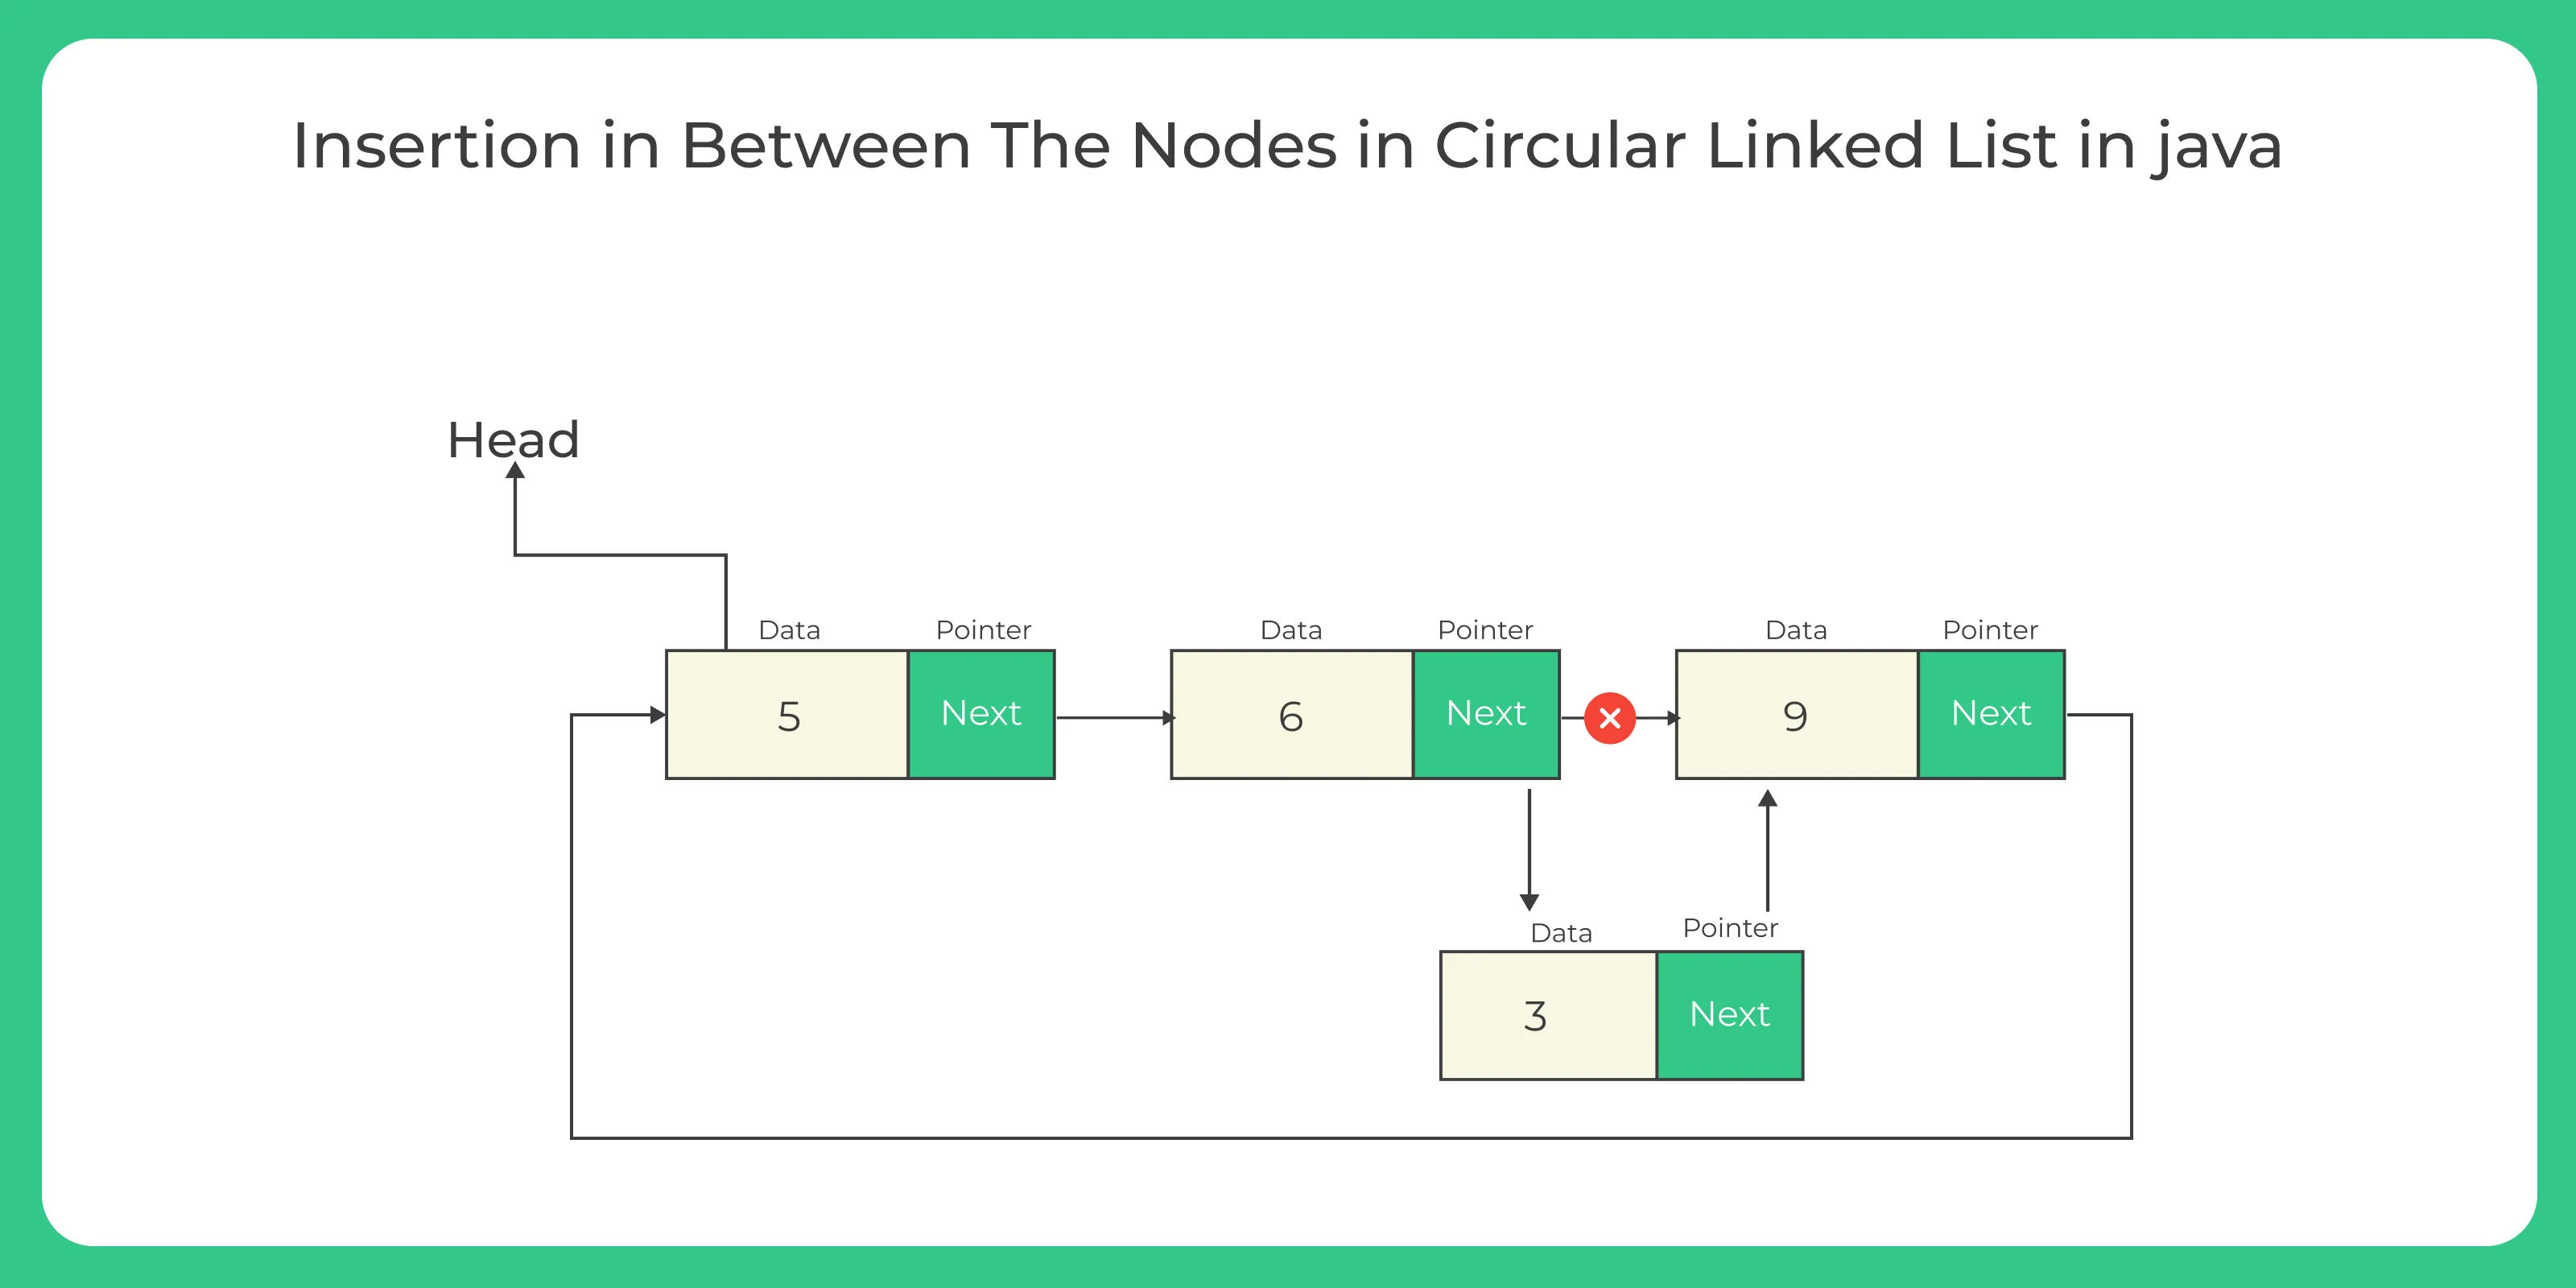 Insertion in Between The Nodes in Circular Linked List in java